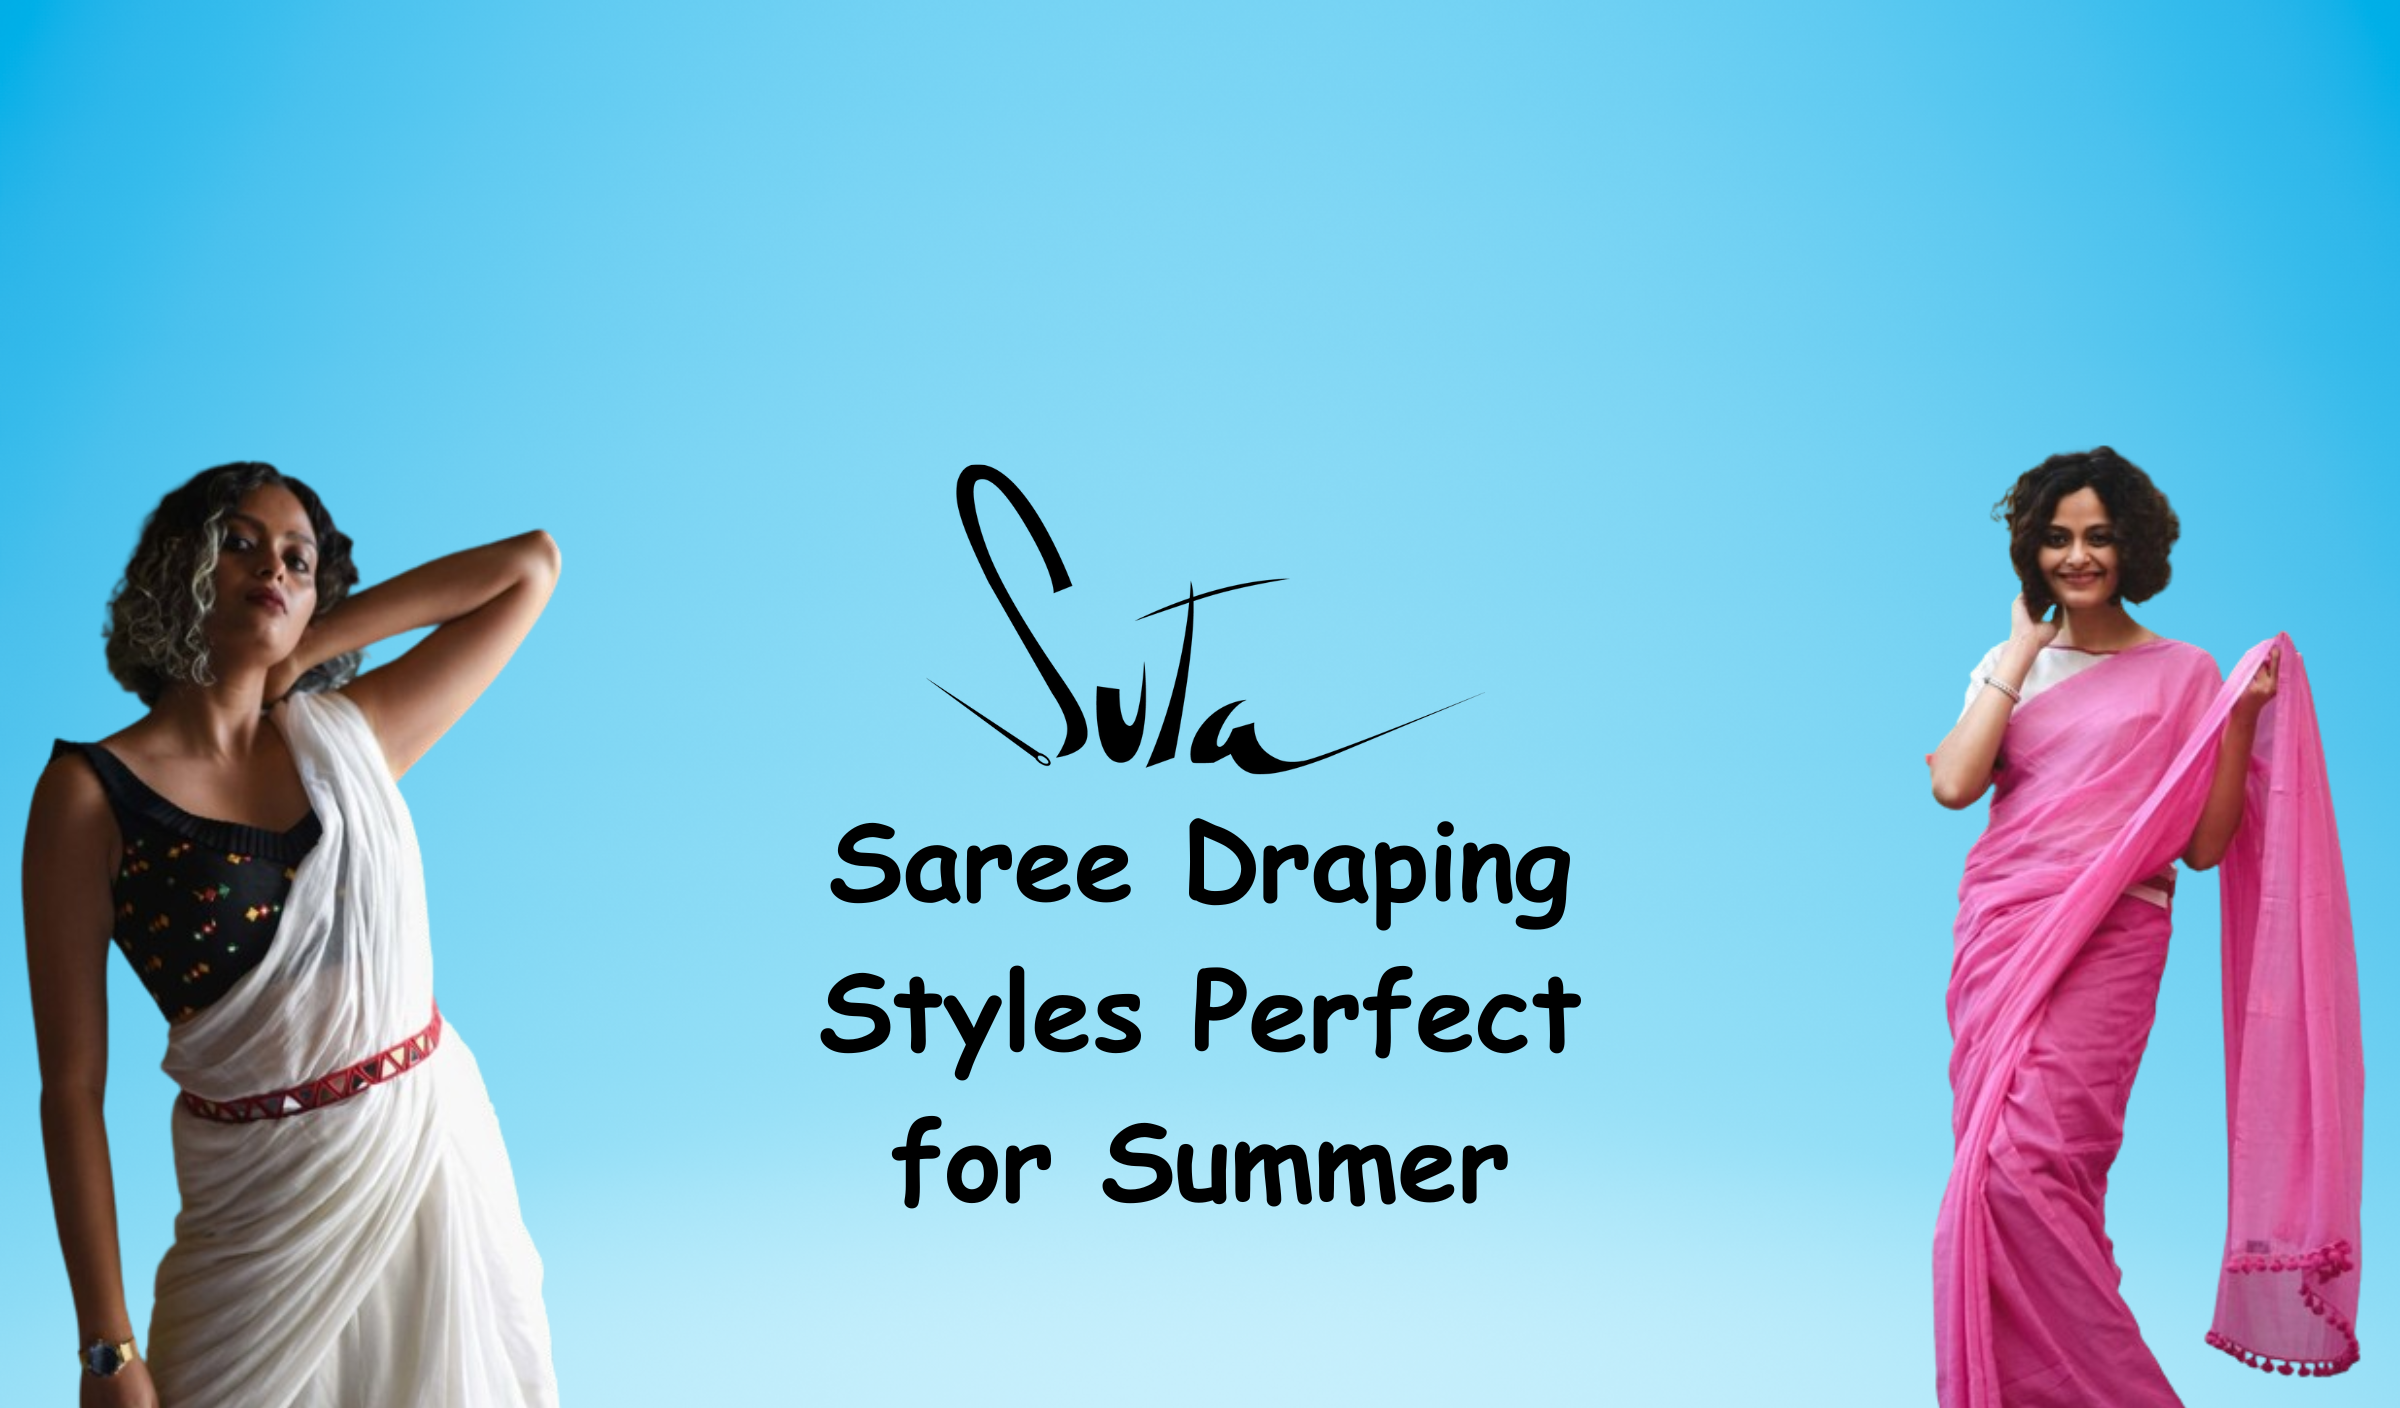 Saree Draping Styles Perfect for Summer